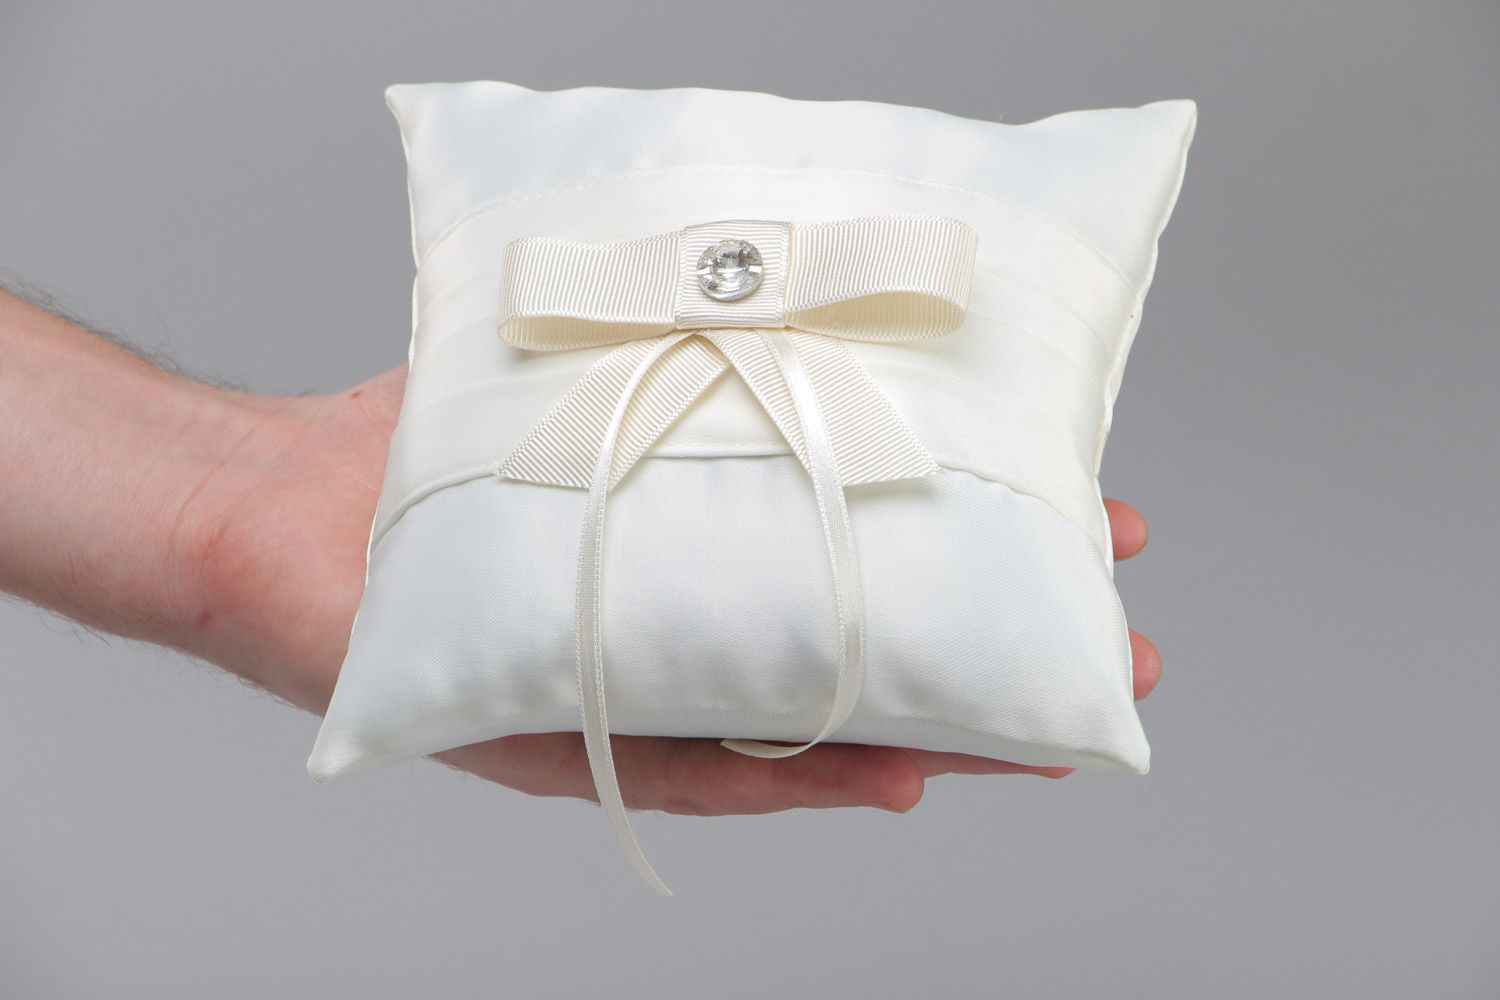 Tender handmade wedding ring pillow sewn of ivory-colored satin fabric with bow photo 5